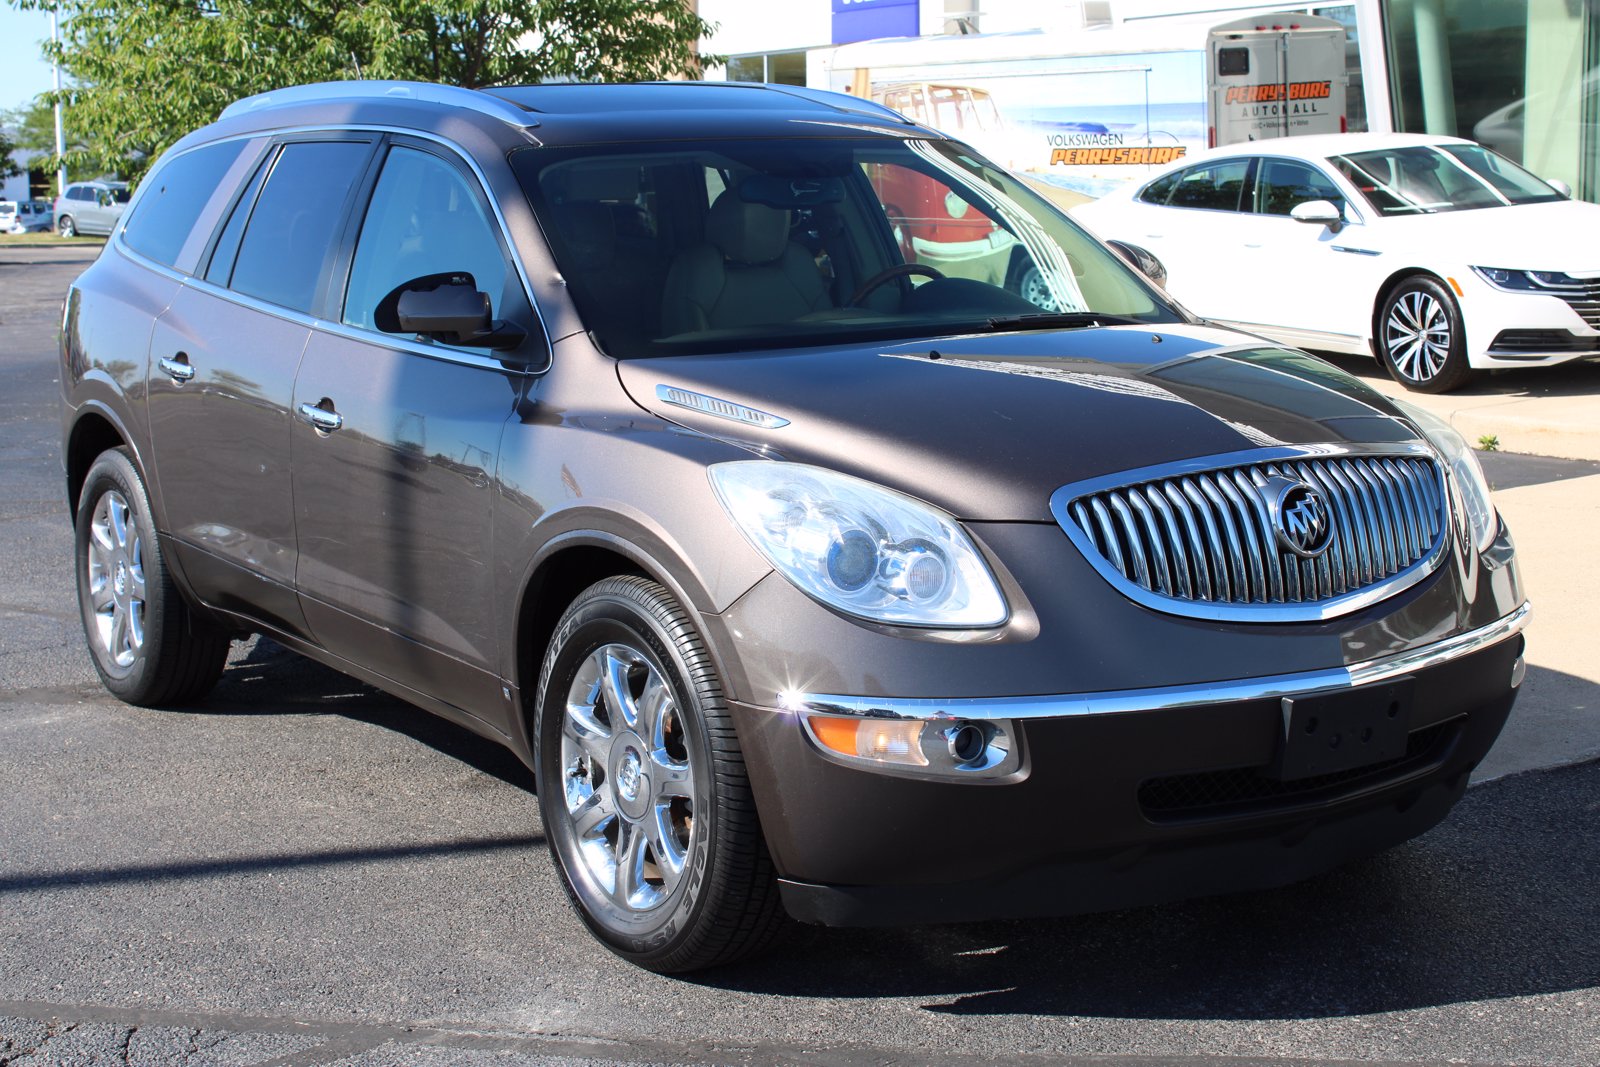 Pre Owned 2008 Buick Enclave CXL Sport Utility in Perrysburg VT222A 